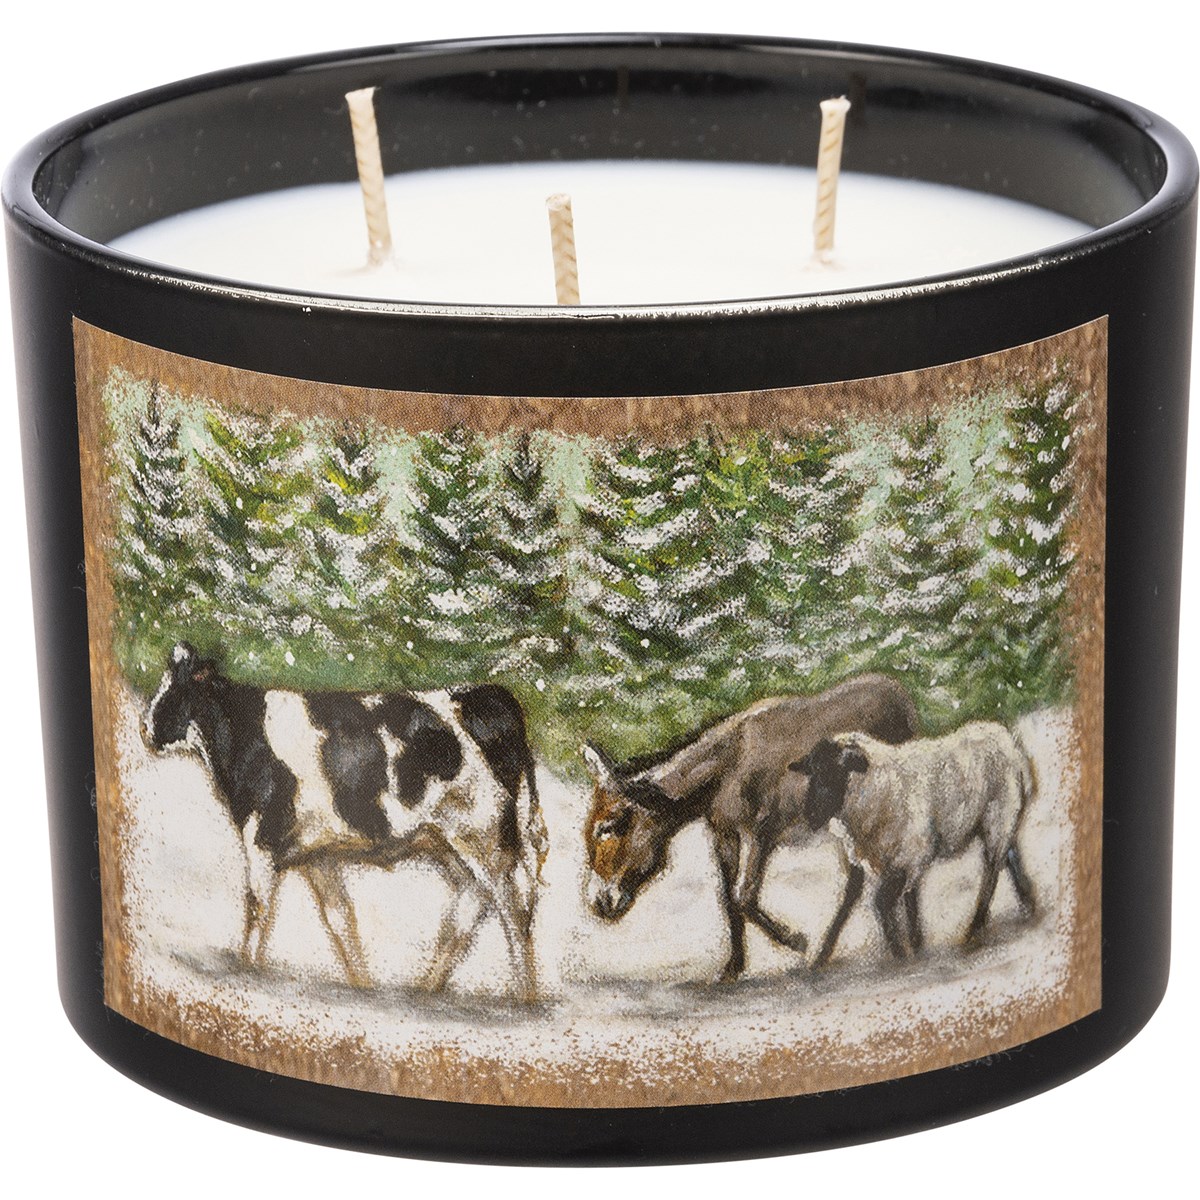 Winter Parade Jar Candle - Soy Wax, Glass, Cotton